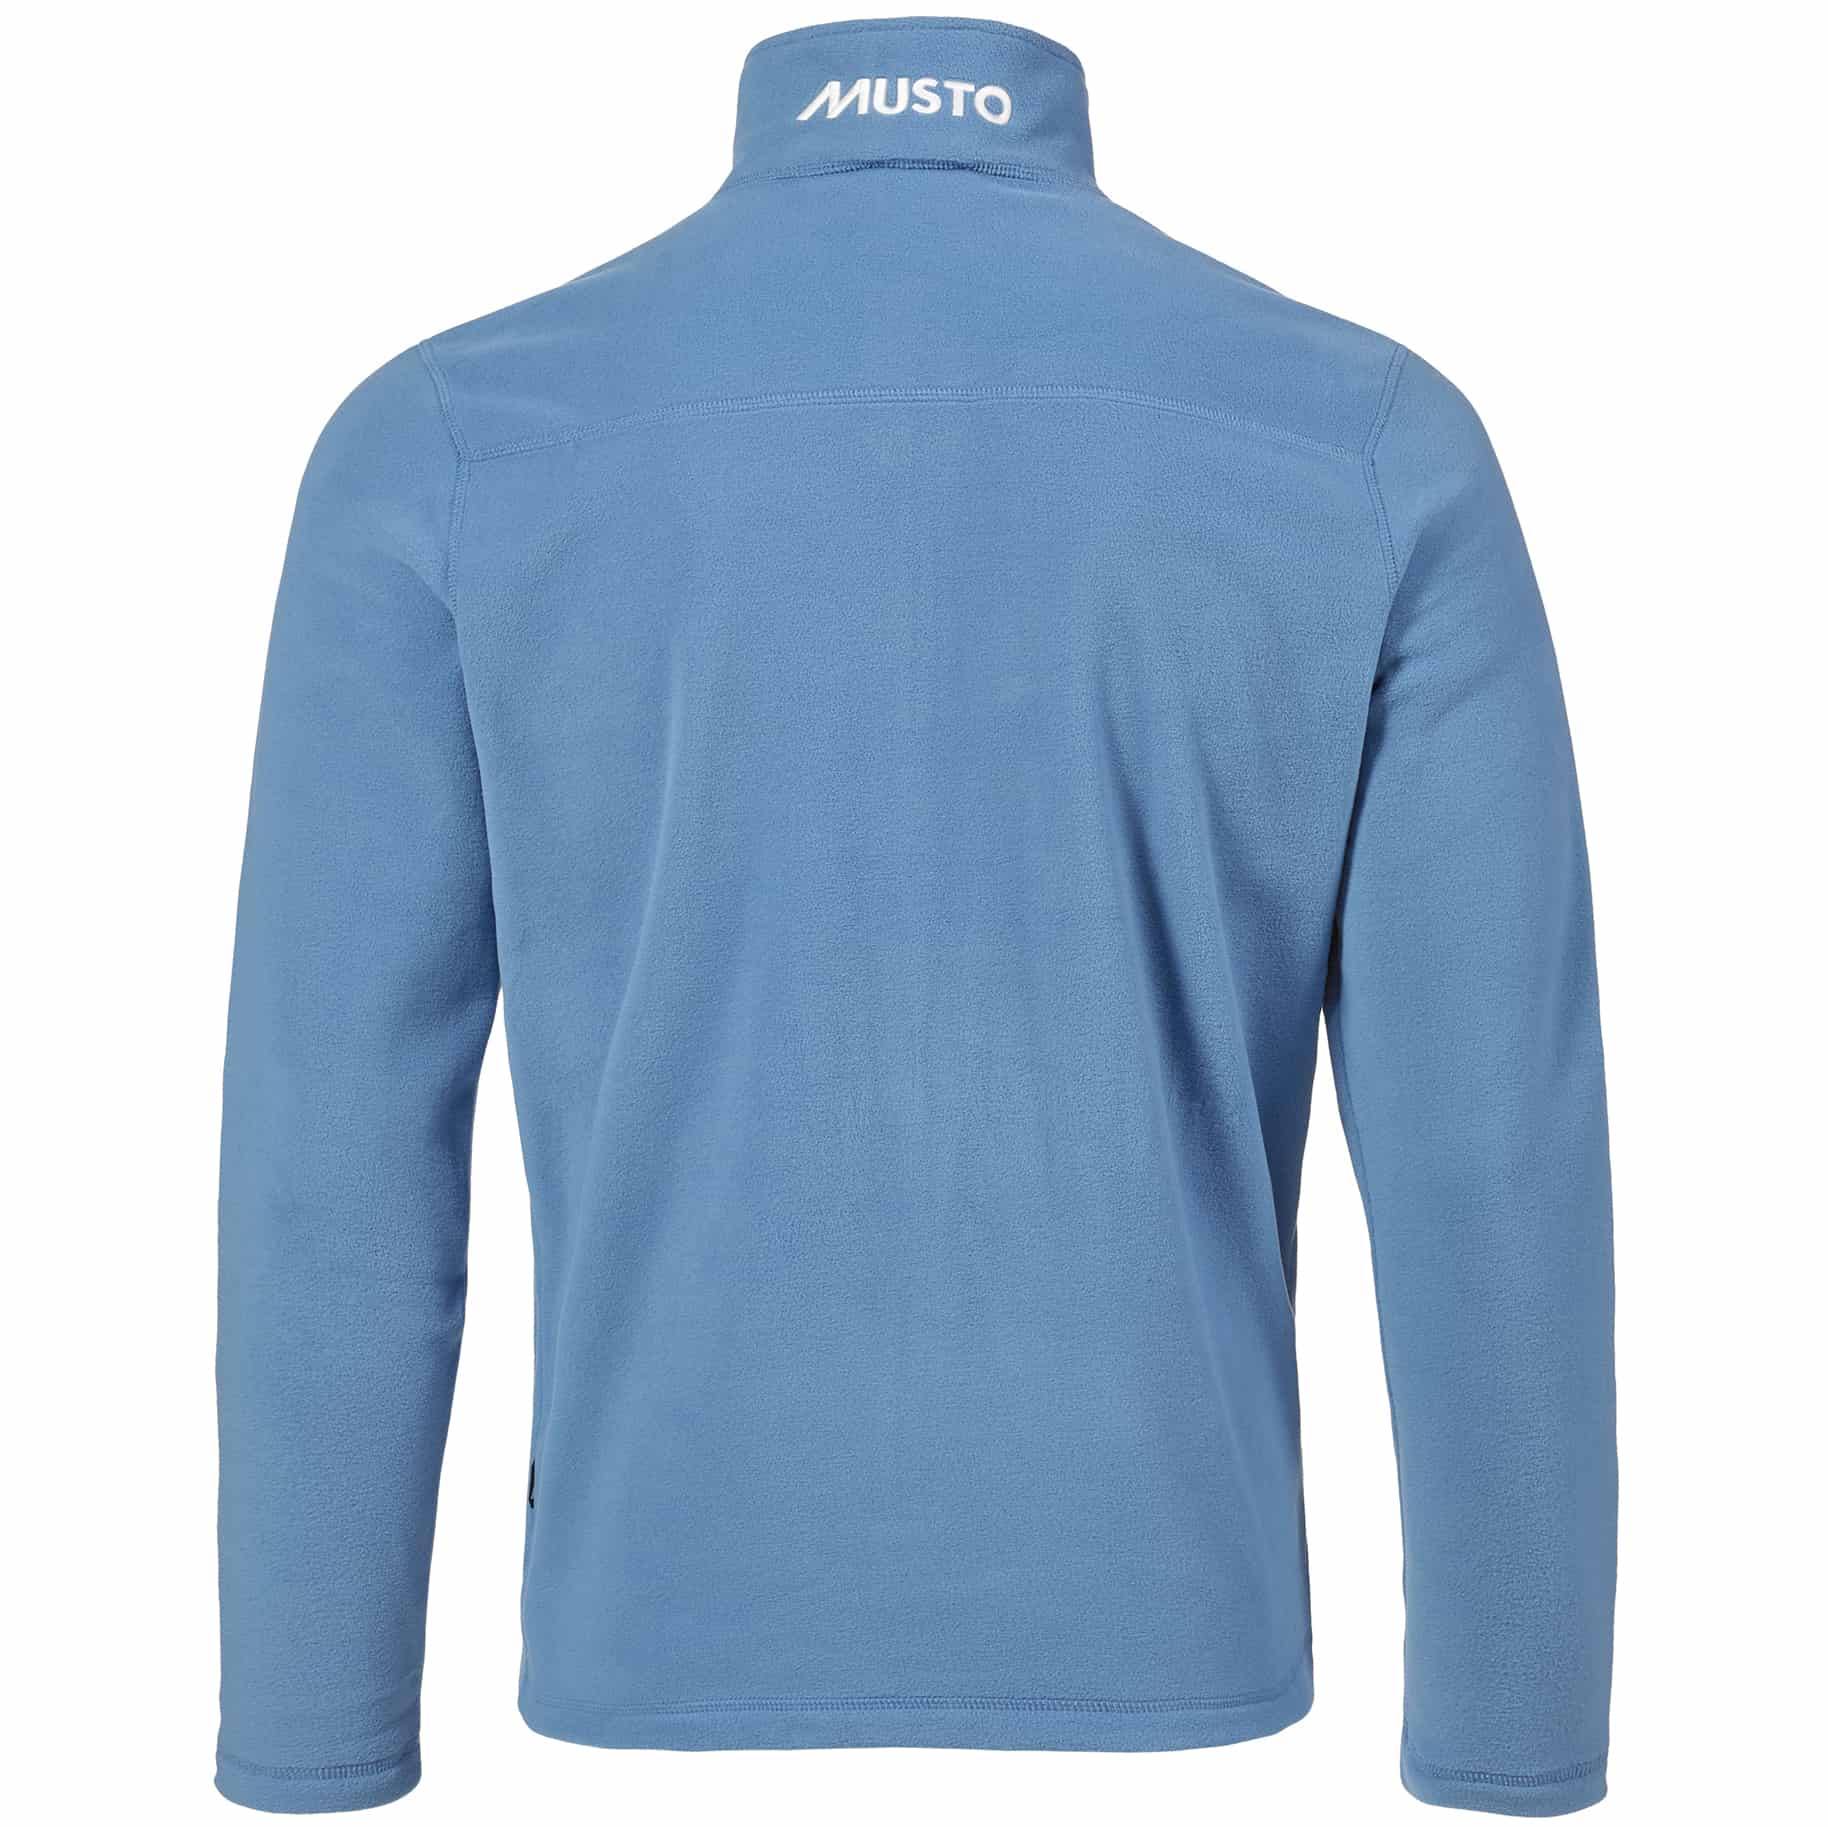 Musto Corsica Fleece 100GM: Warm but also highly breathable